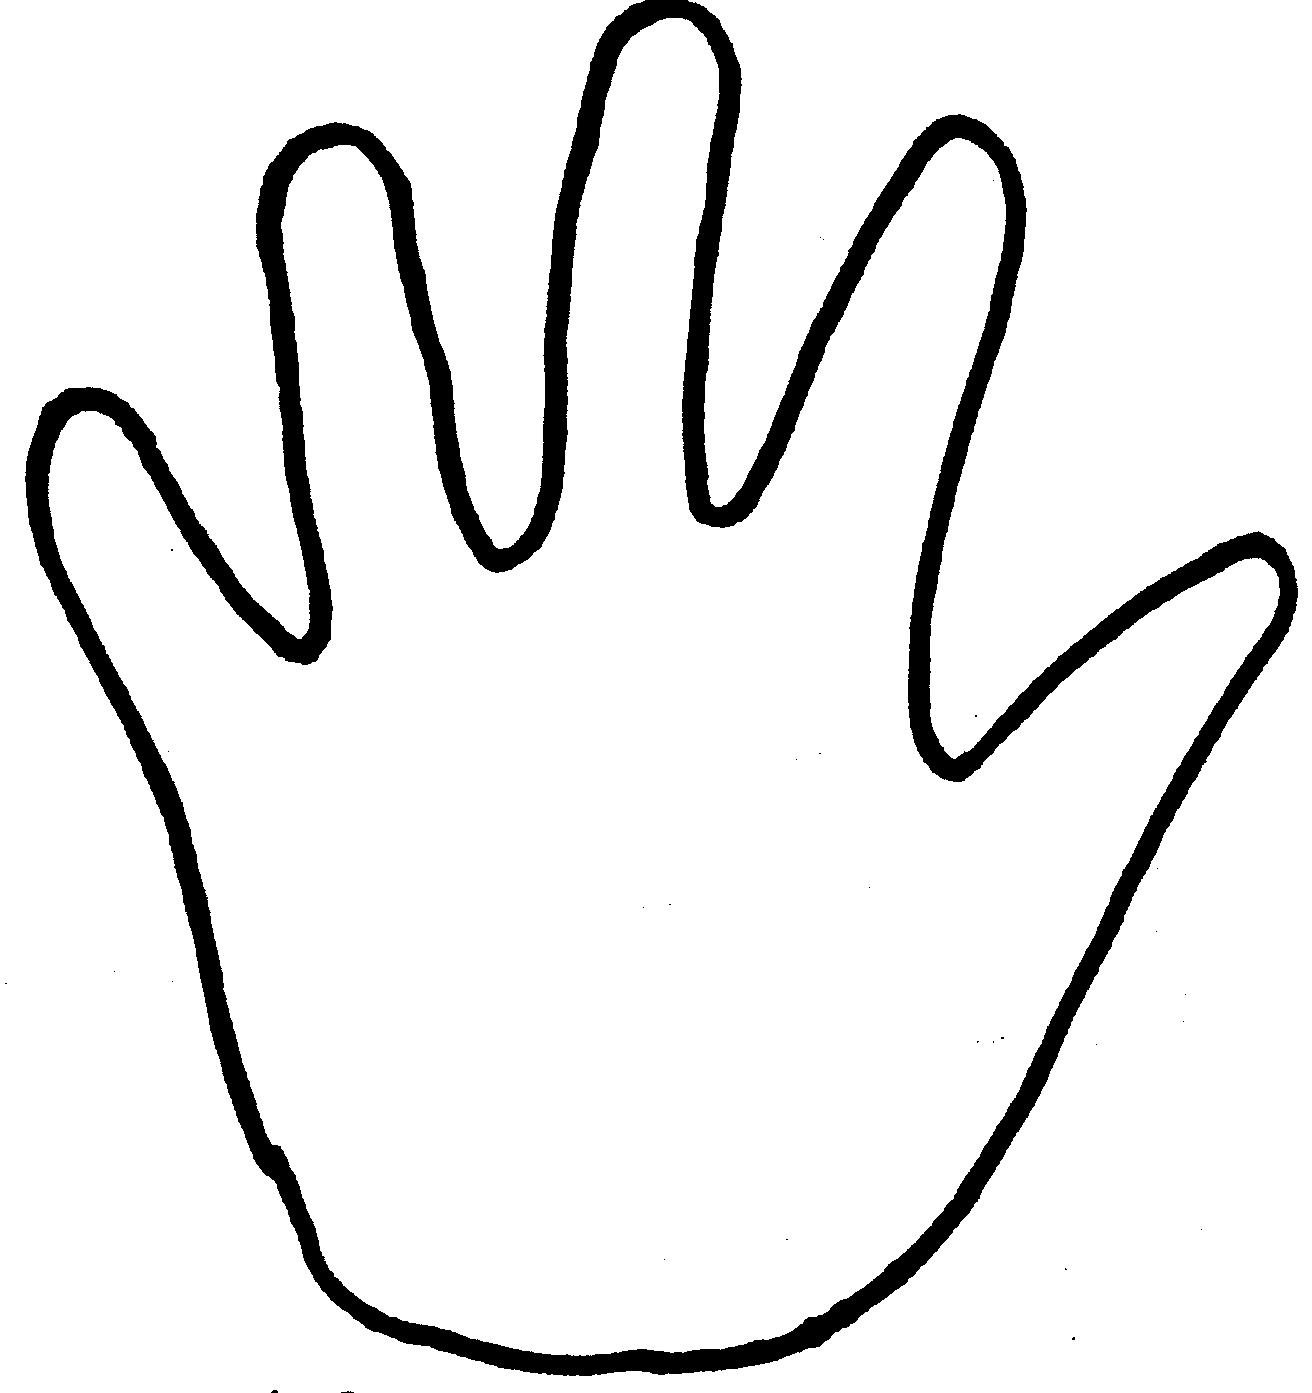 Coloring Page Hand Printable Coloring Sheet 99Coloring.Com ...